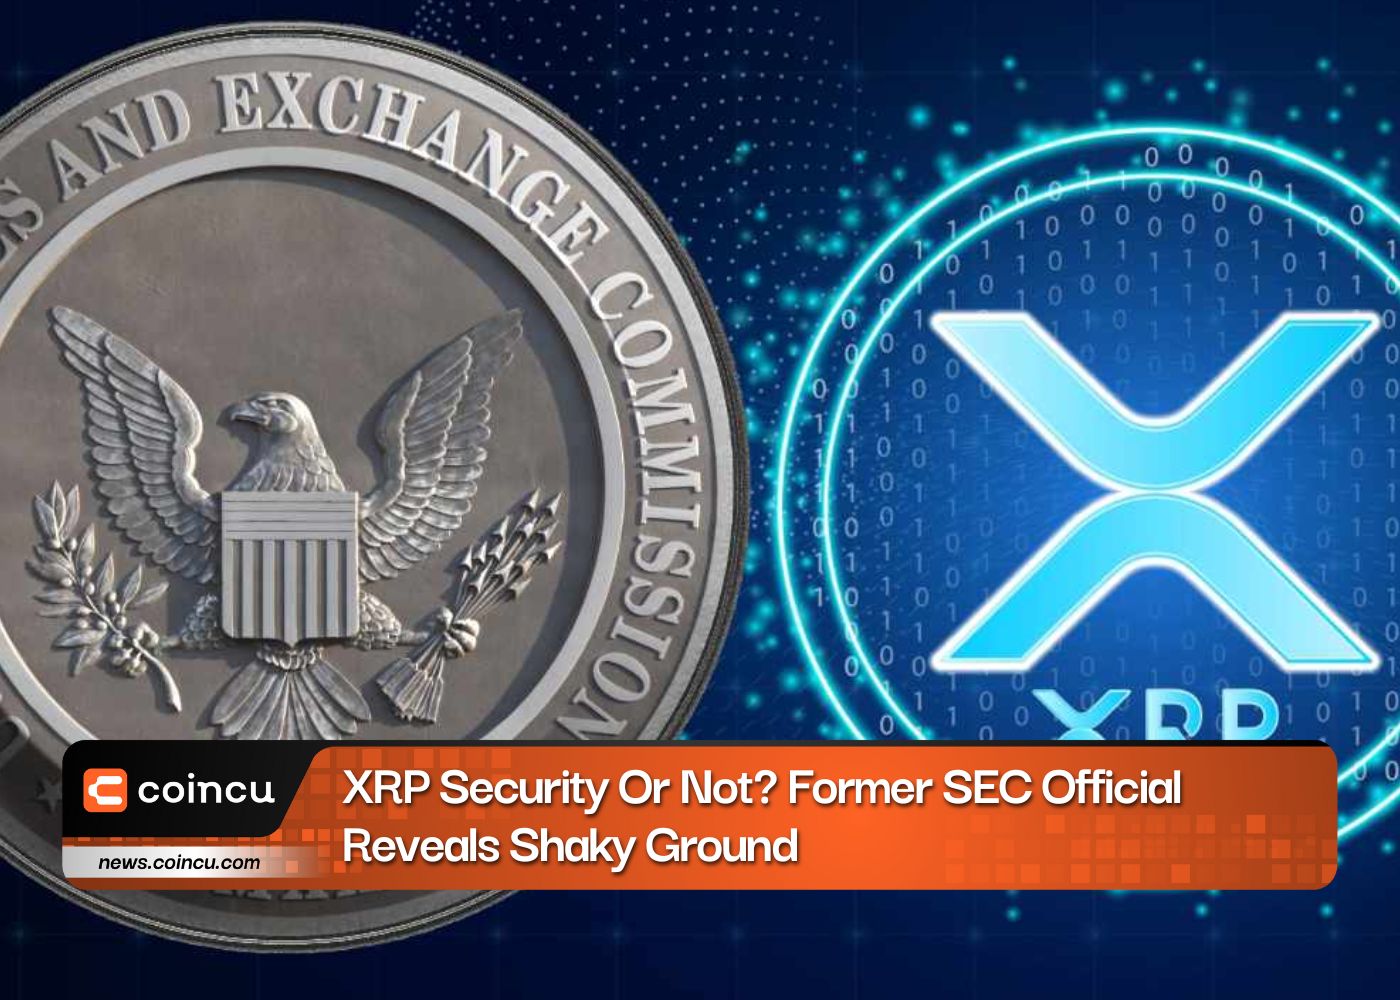 XRP Security Or Not? Former SEC Official Reveals Shaky Ground